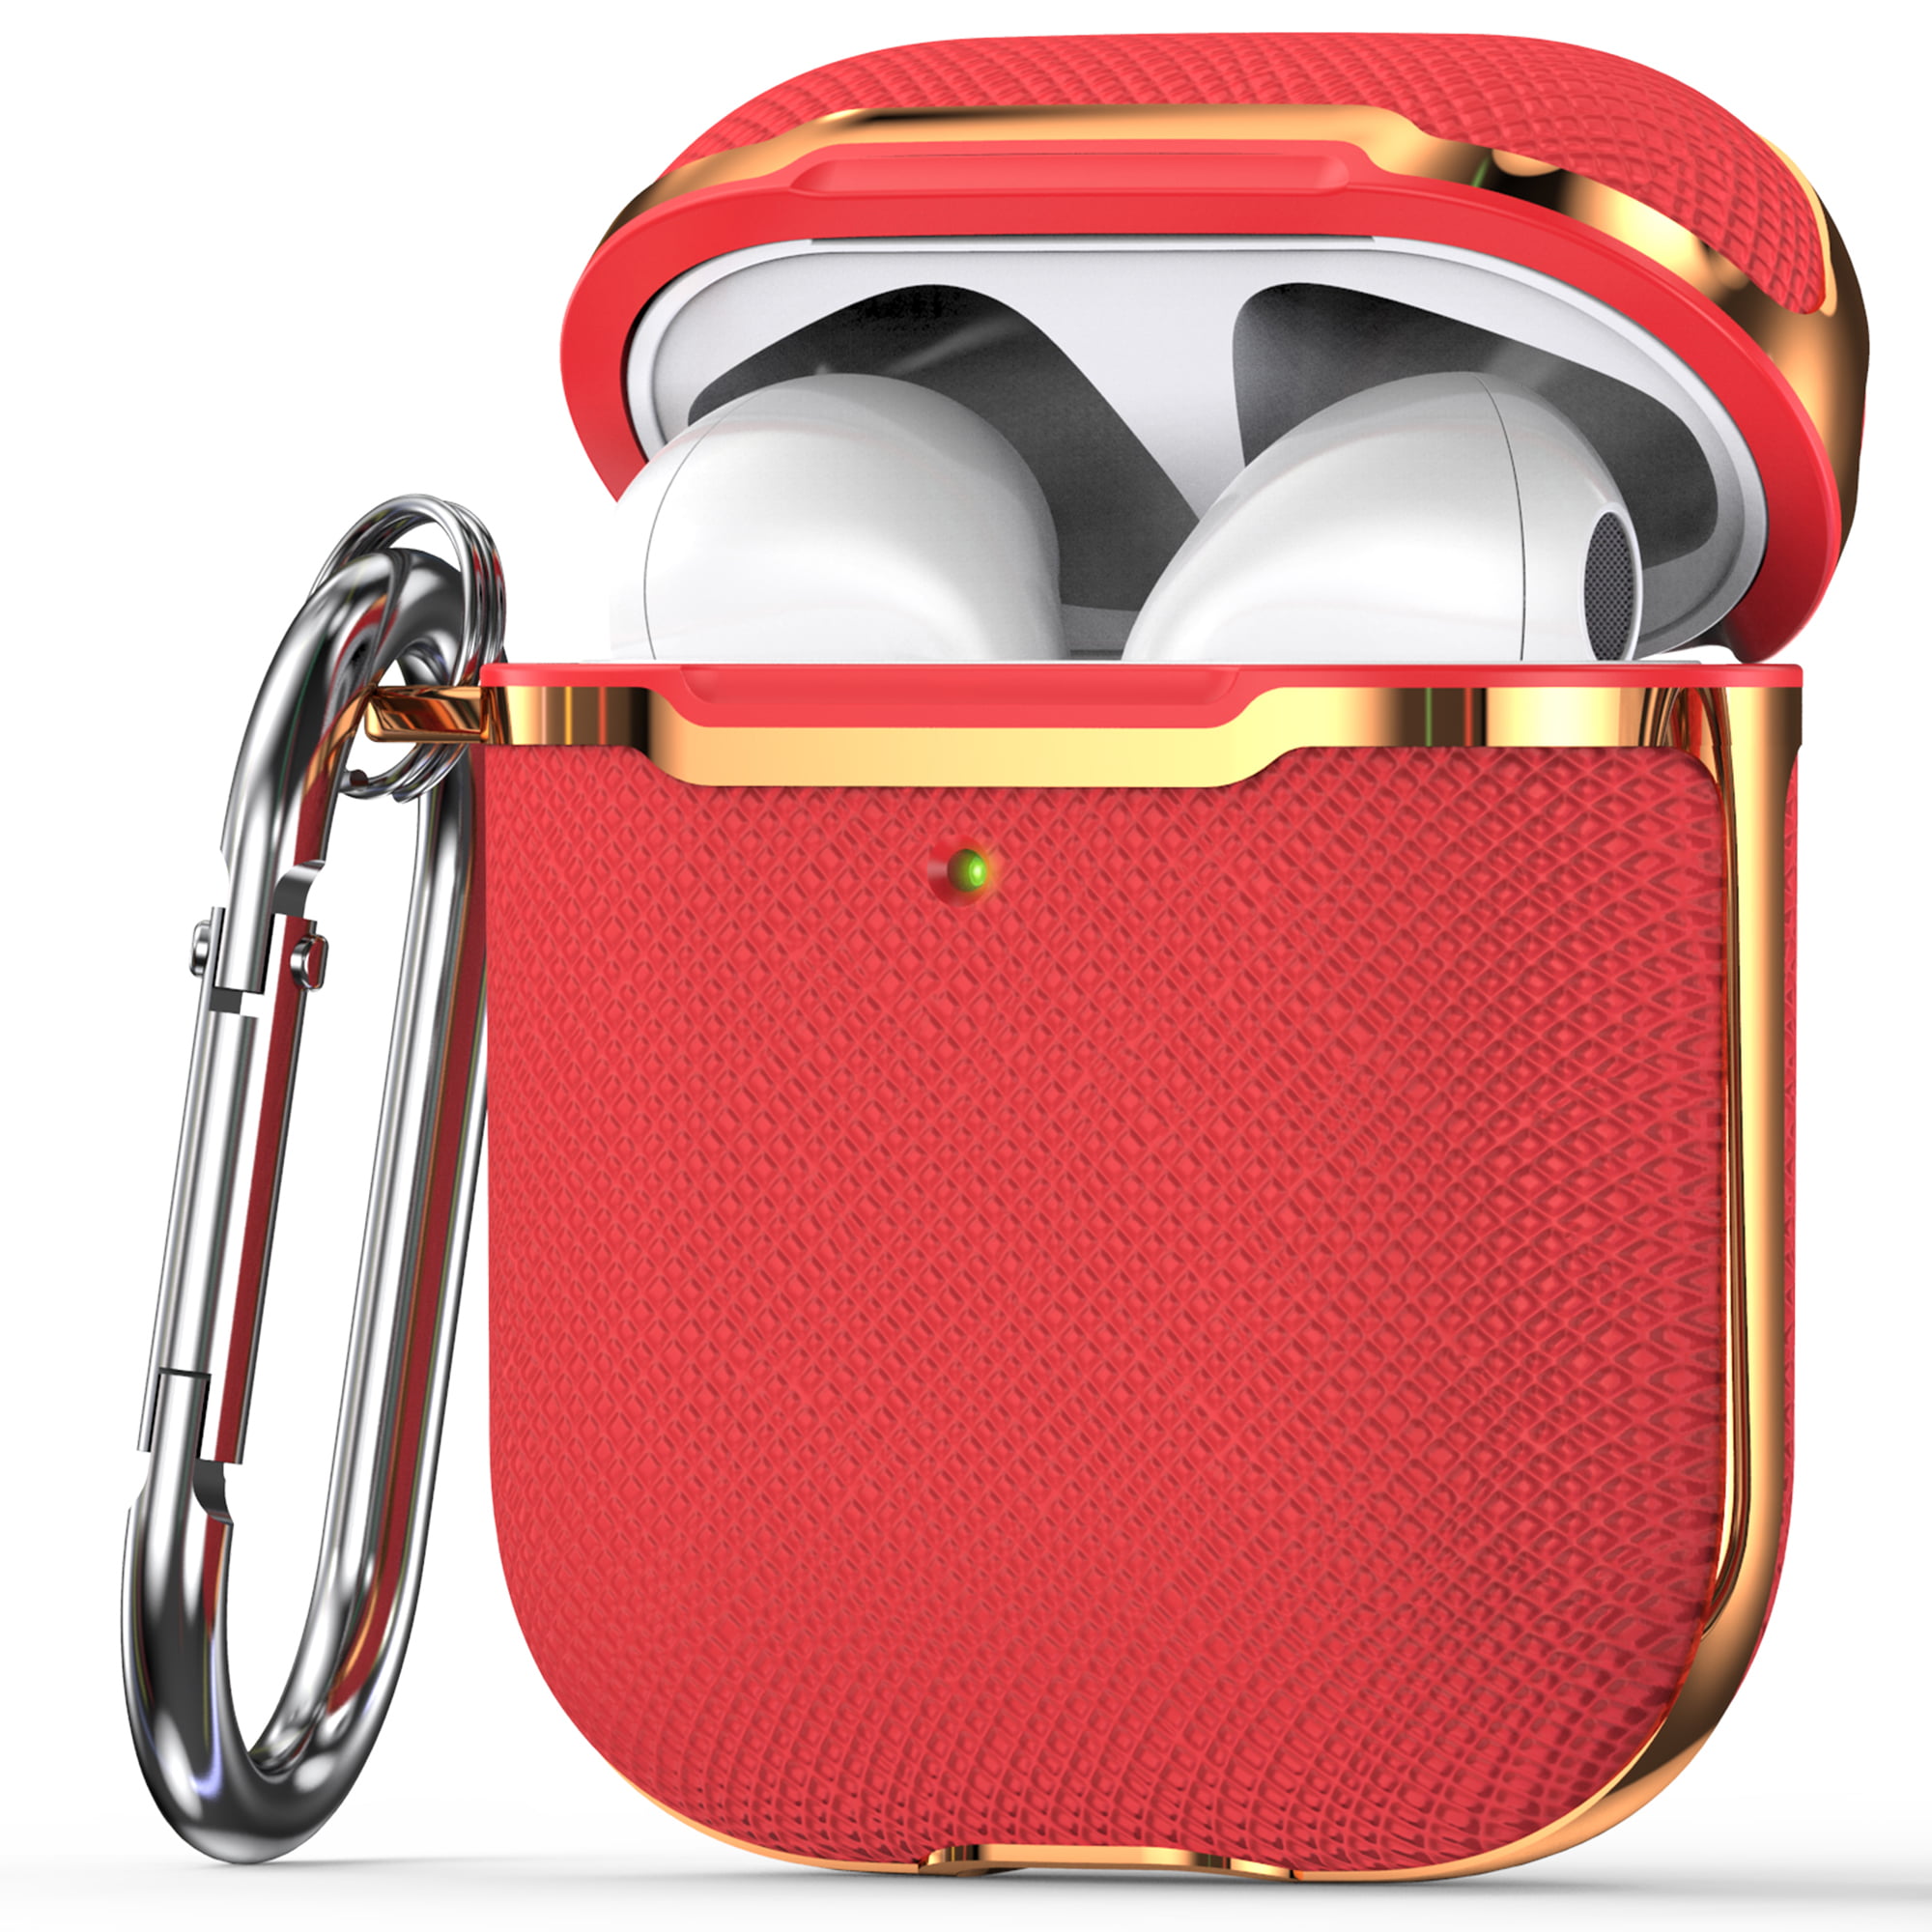 KM Supreme Inspired Suitcase Concept Design Airpods Case Cover with Ring  Holder